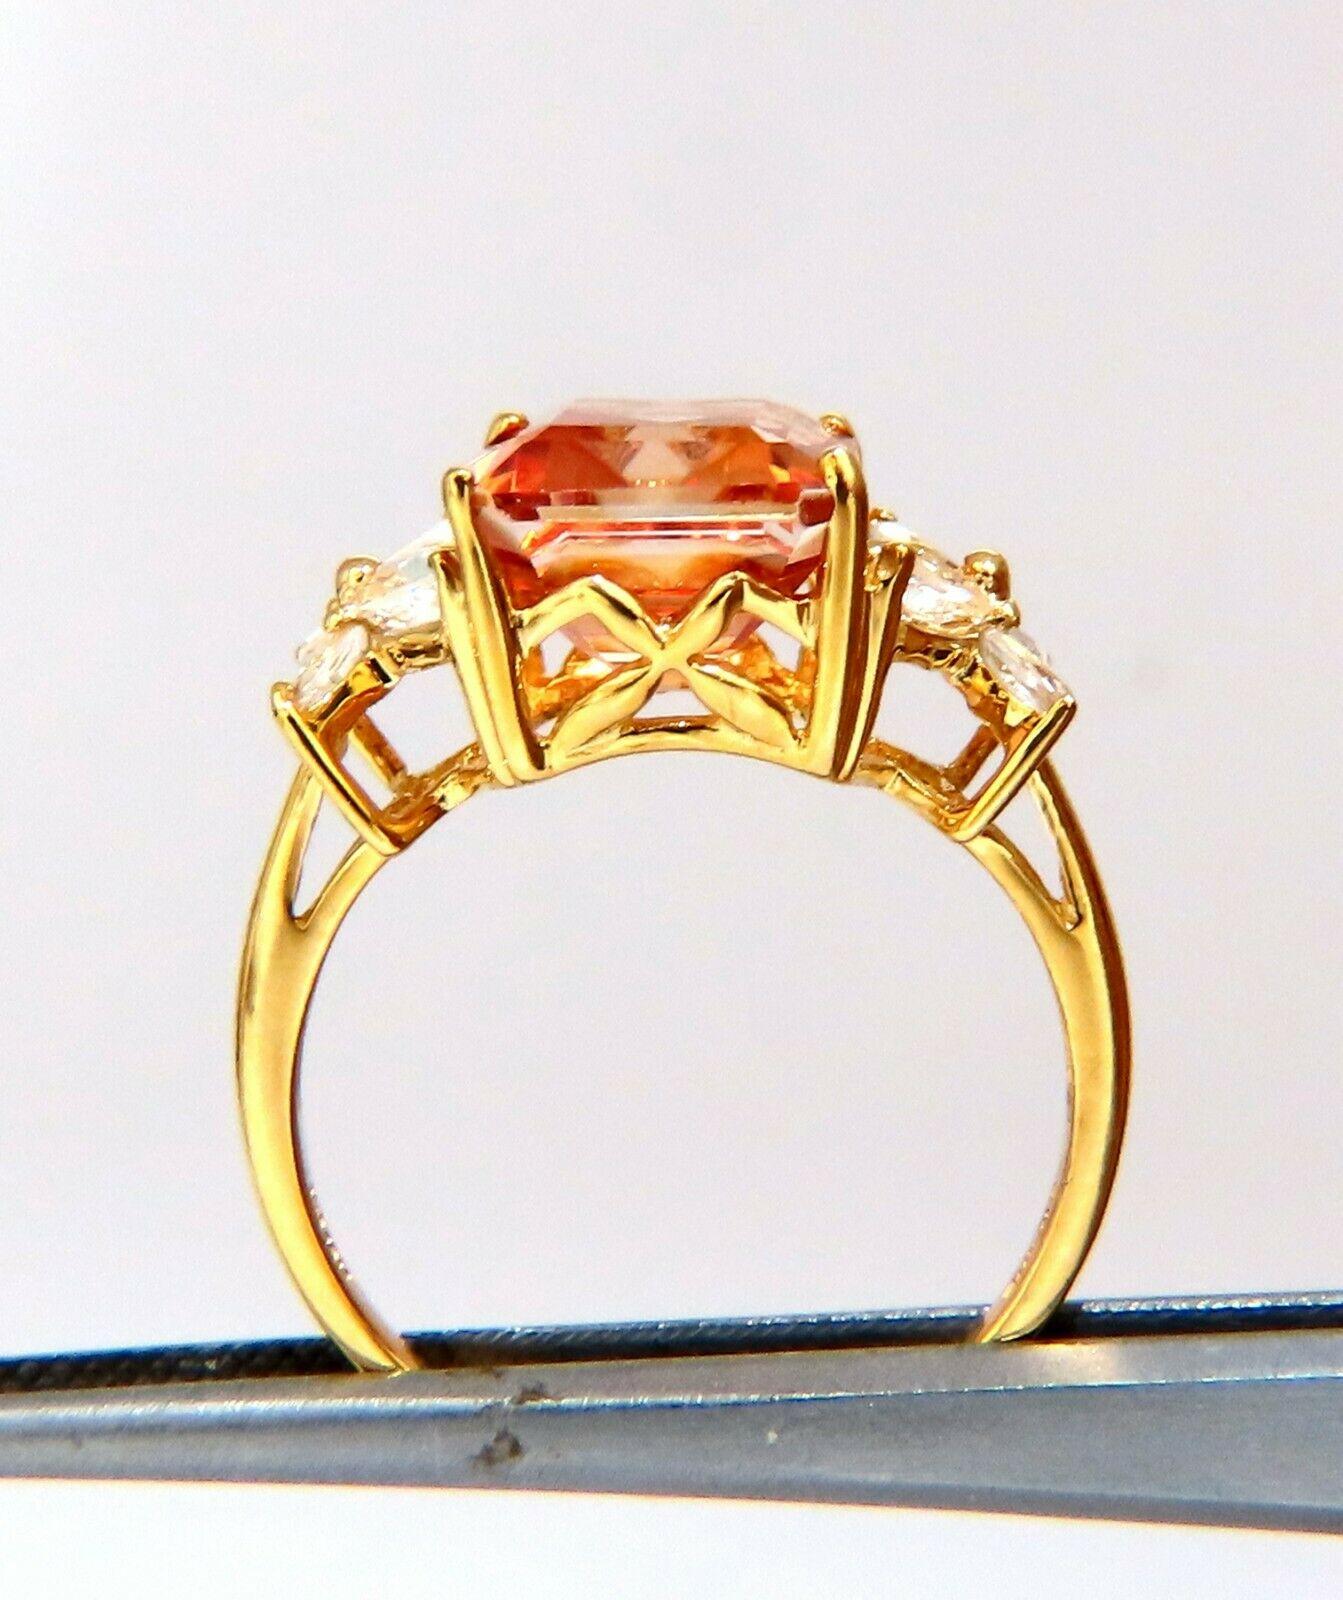 Cubic Zirconia Diamond Ring.

14x10 cz, fancy color orange.

Natural side Marquise diamonds, .50ct.

10kt yellow gold. 5.4 Grams

depth of ring 8.3 mm

Size 10 and we may resize.